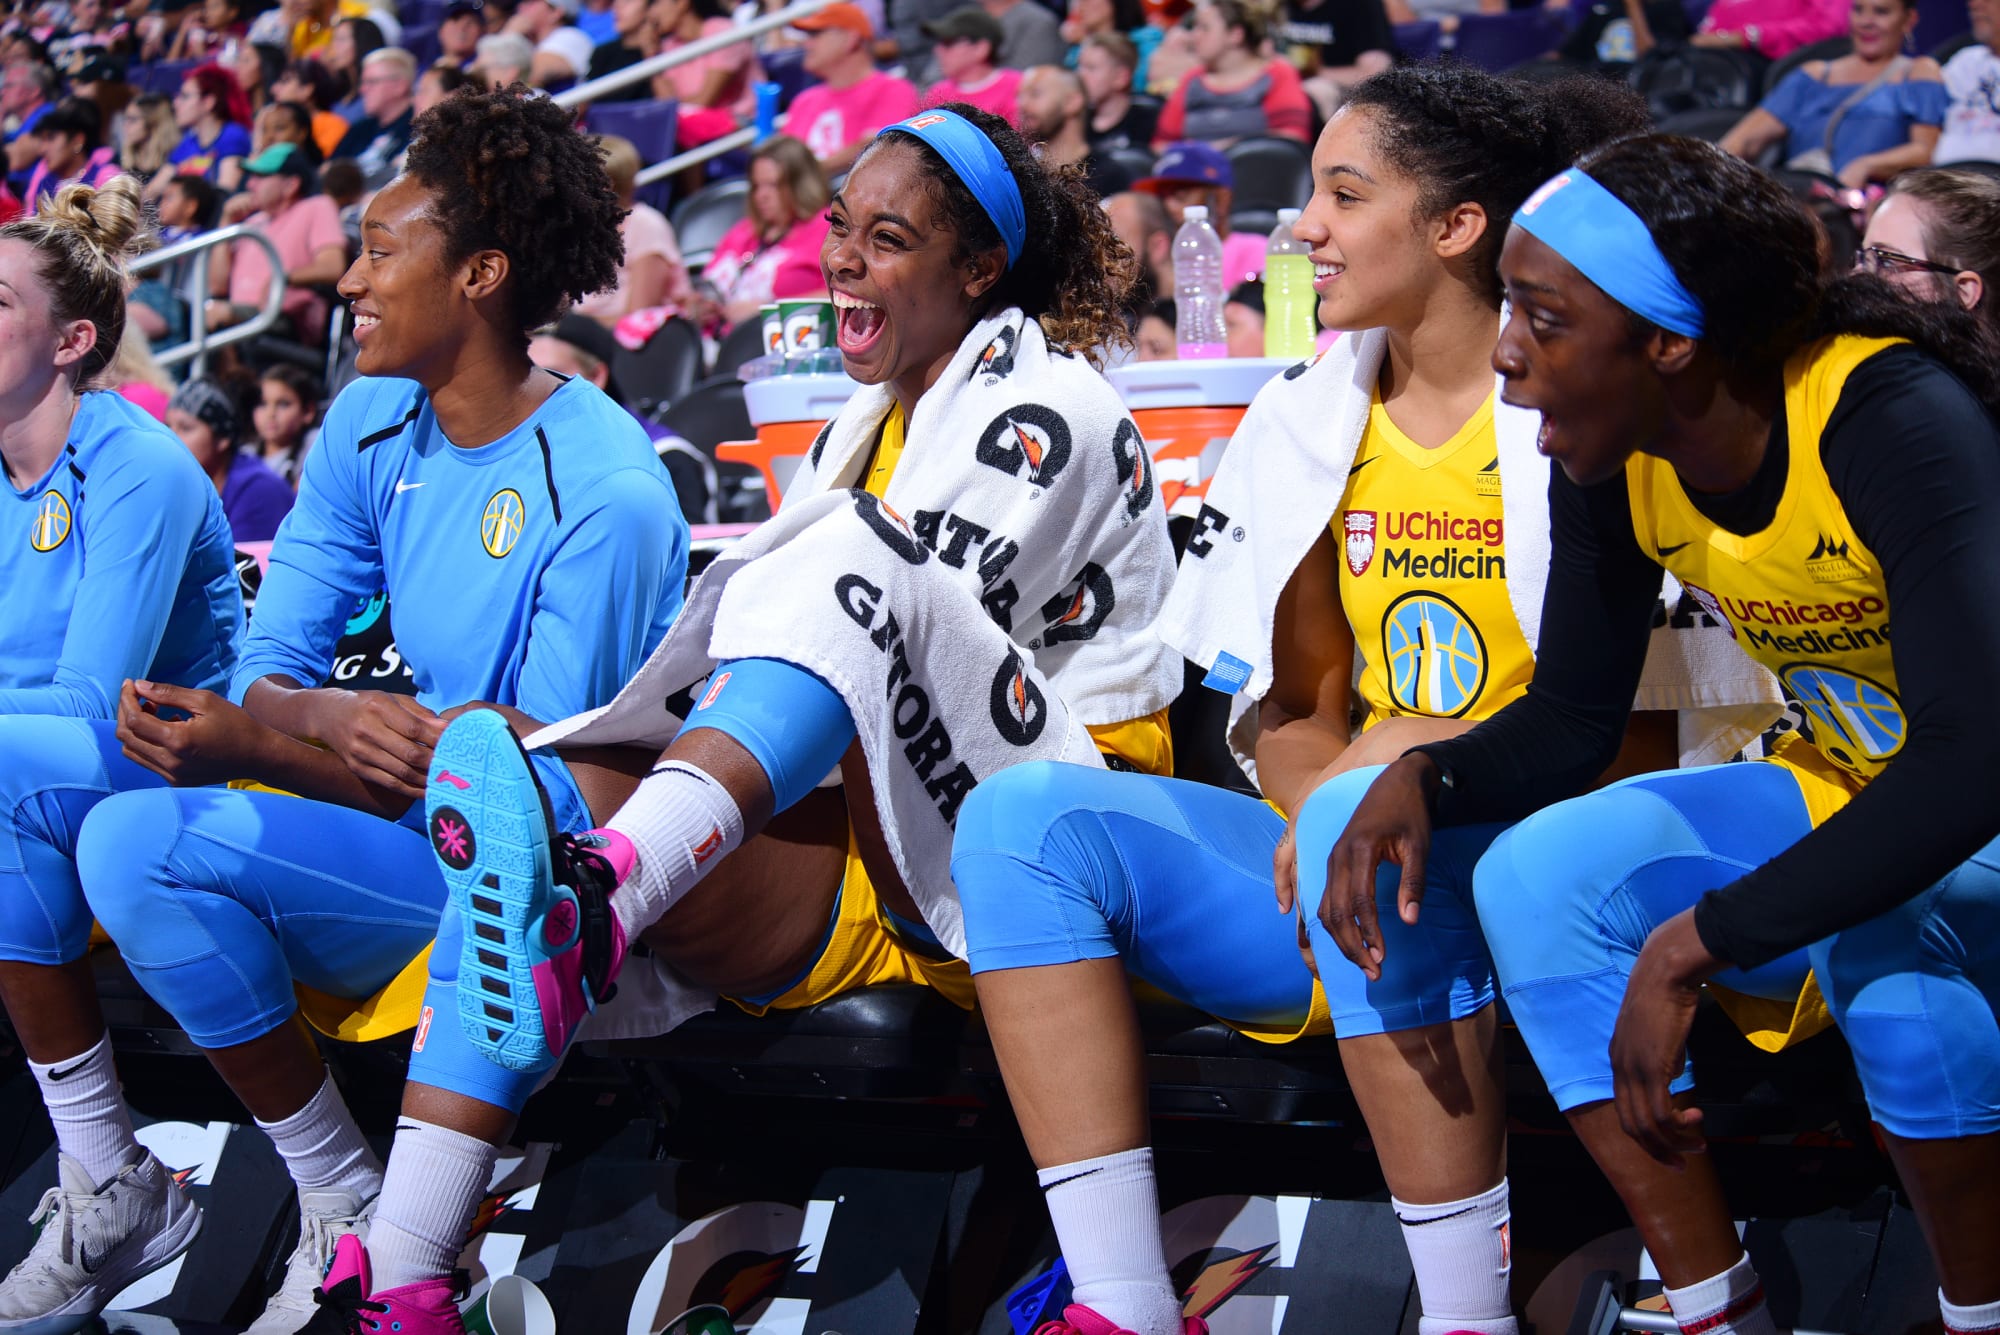 WNBA news gives Chicago Sky thirdmost wins in franchise history